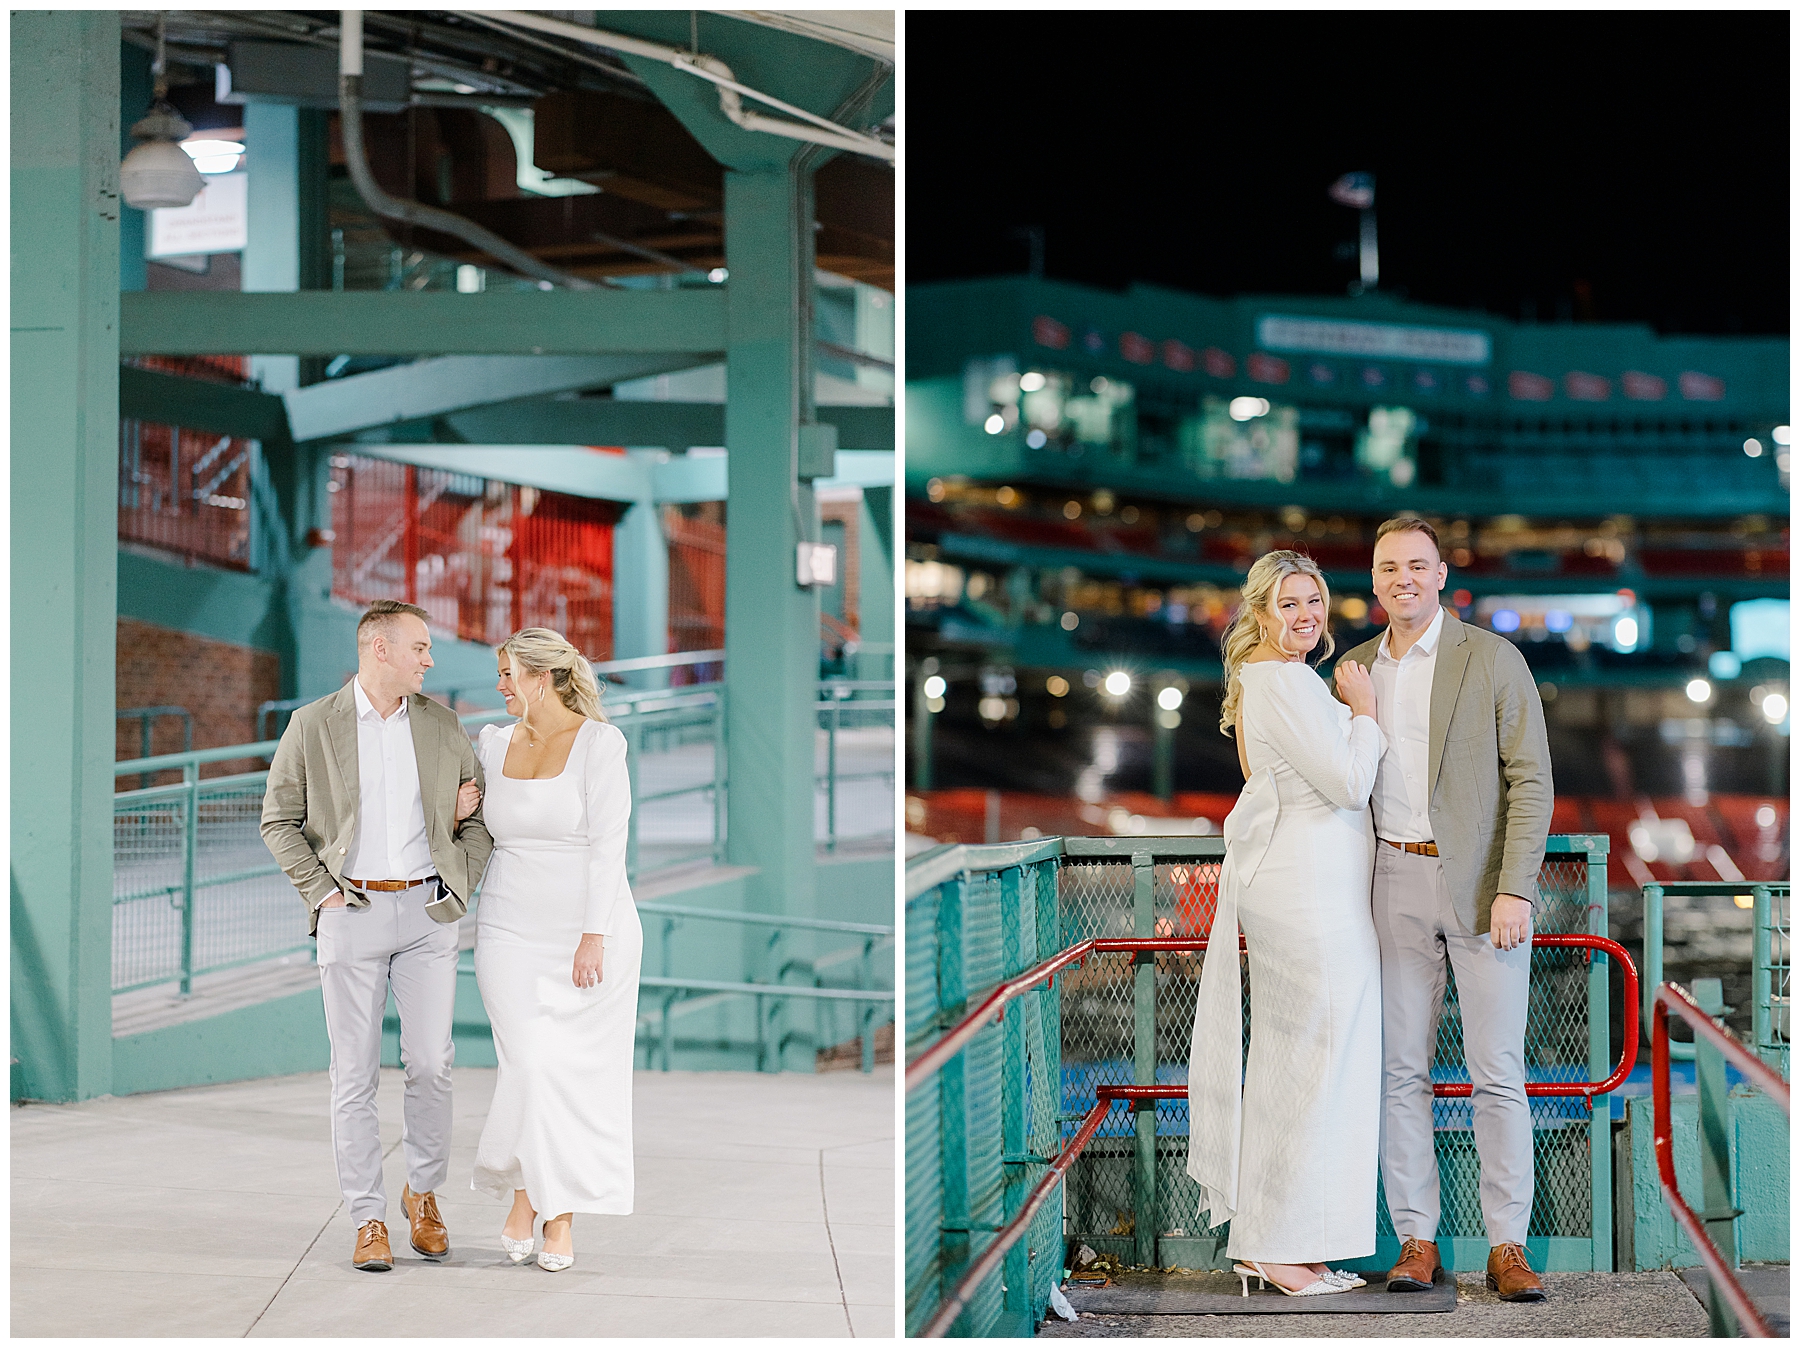 soon-to-be newlyweds at Fenway Park Rehearsal Dinner